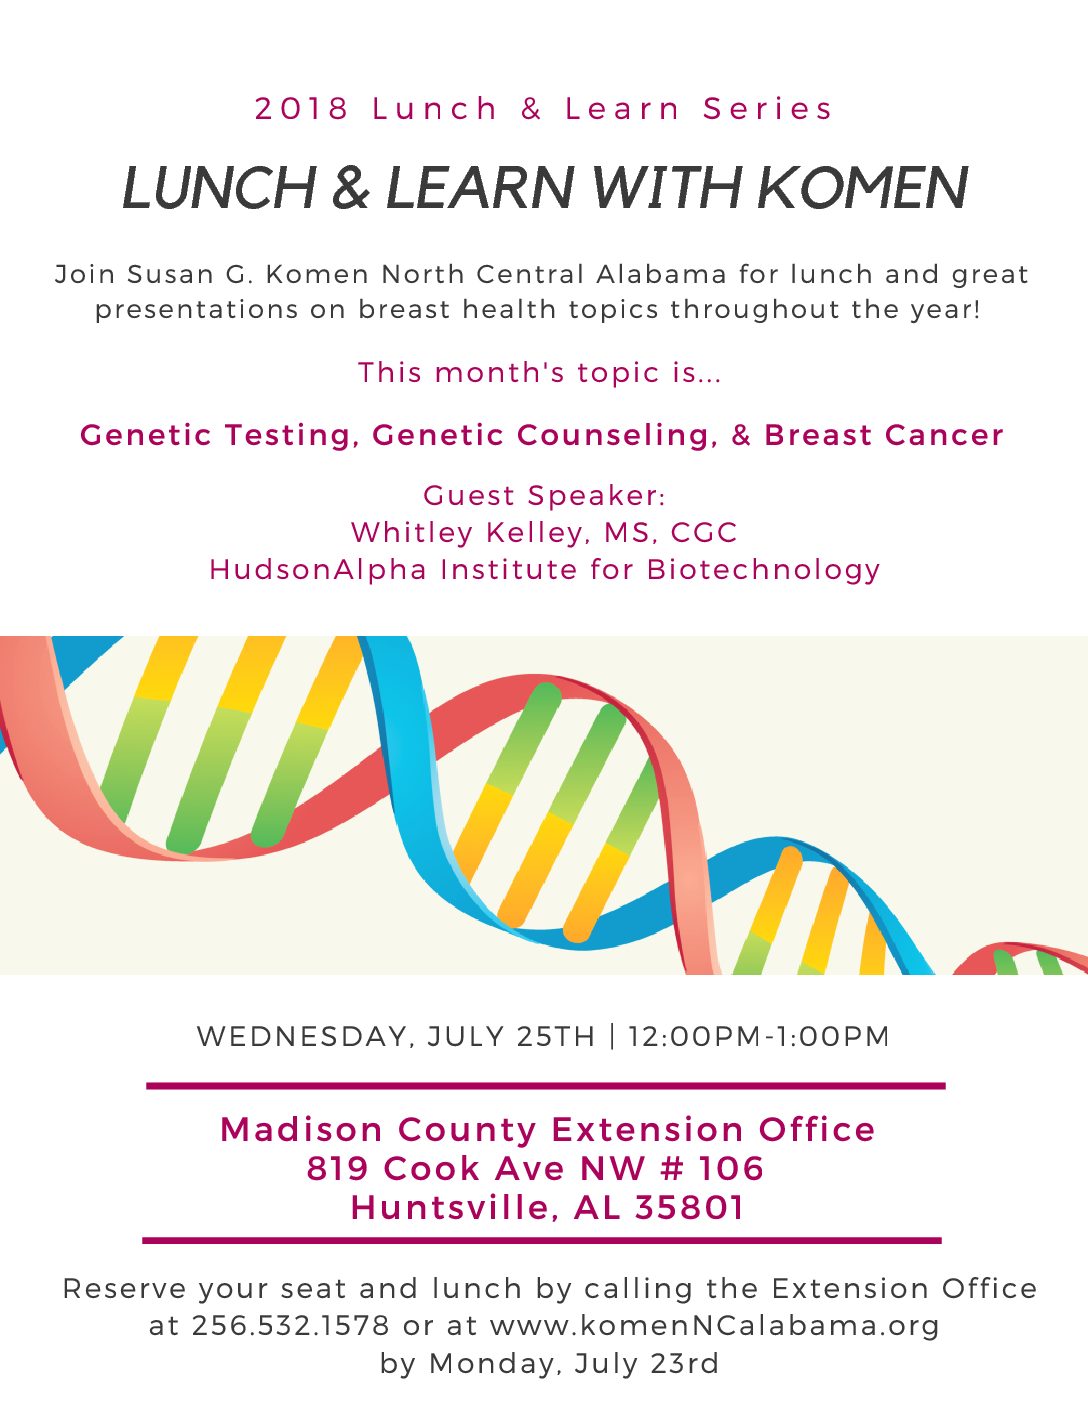 Free Lunch & Learn Breast Health Education with Susan G. Komen North Central Alabama